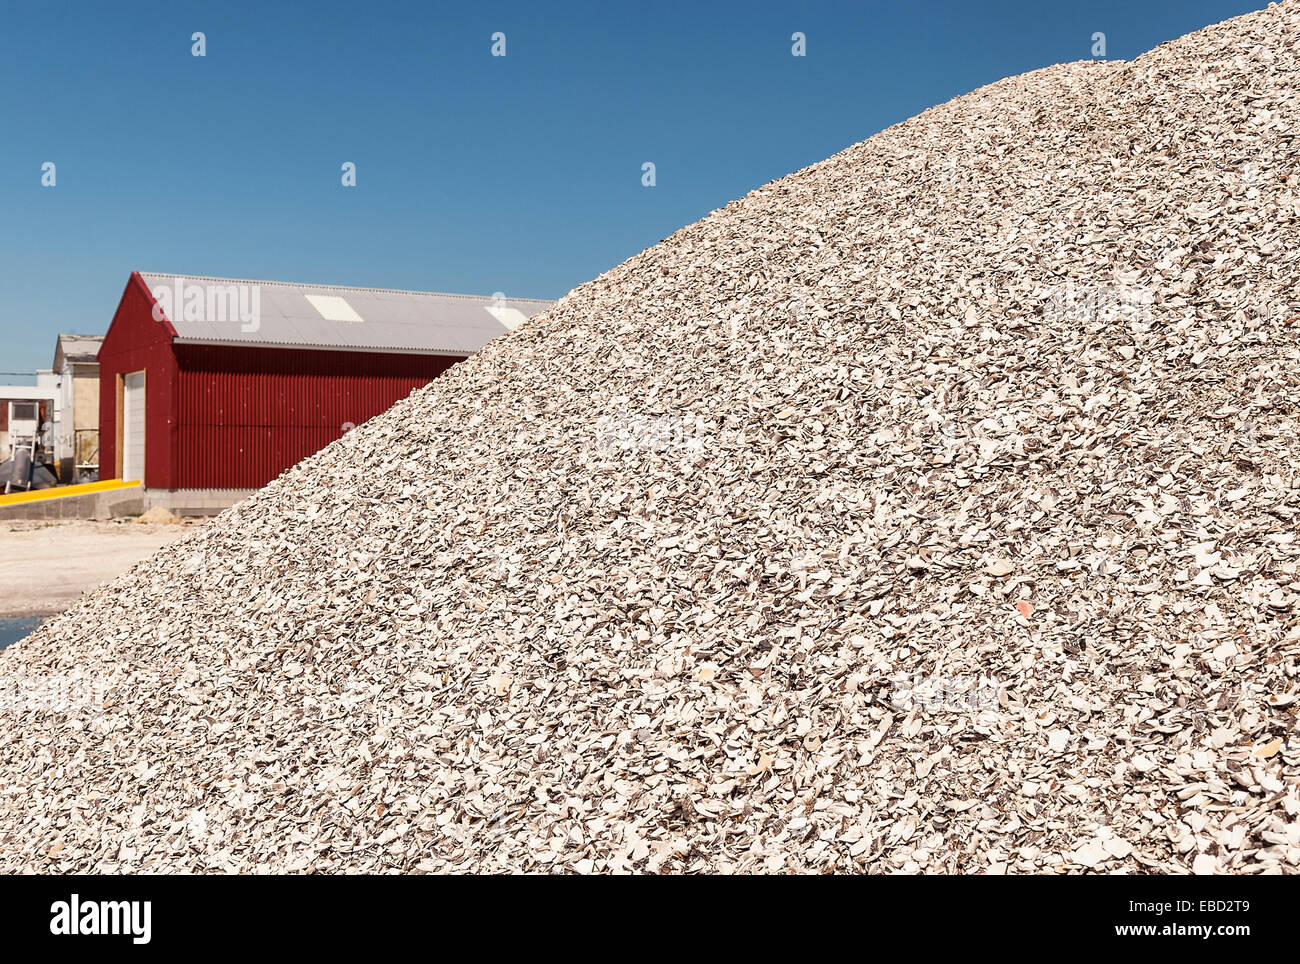 Mountain of broken oyster shells outside a packing shed in the fishing village of Port norris, New Jersey. Stock Photo